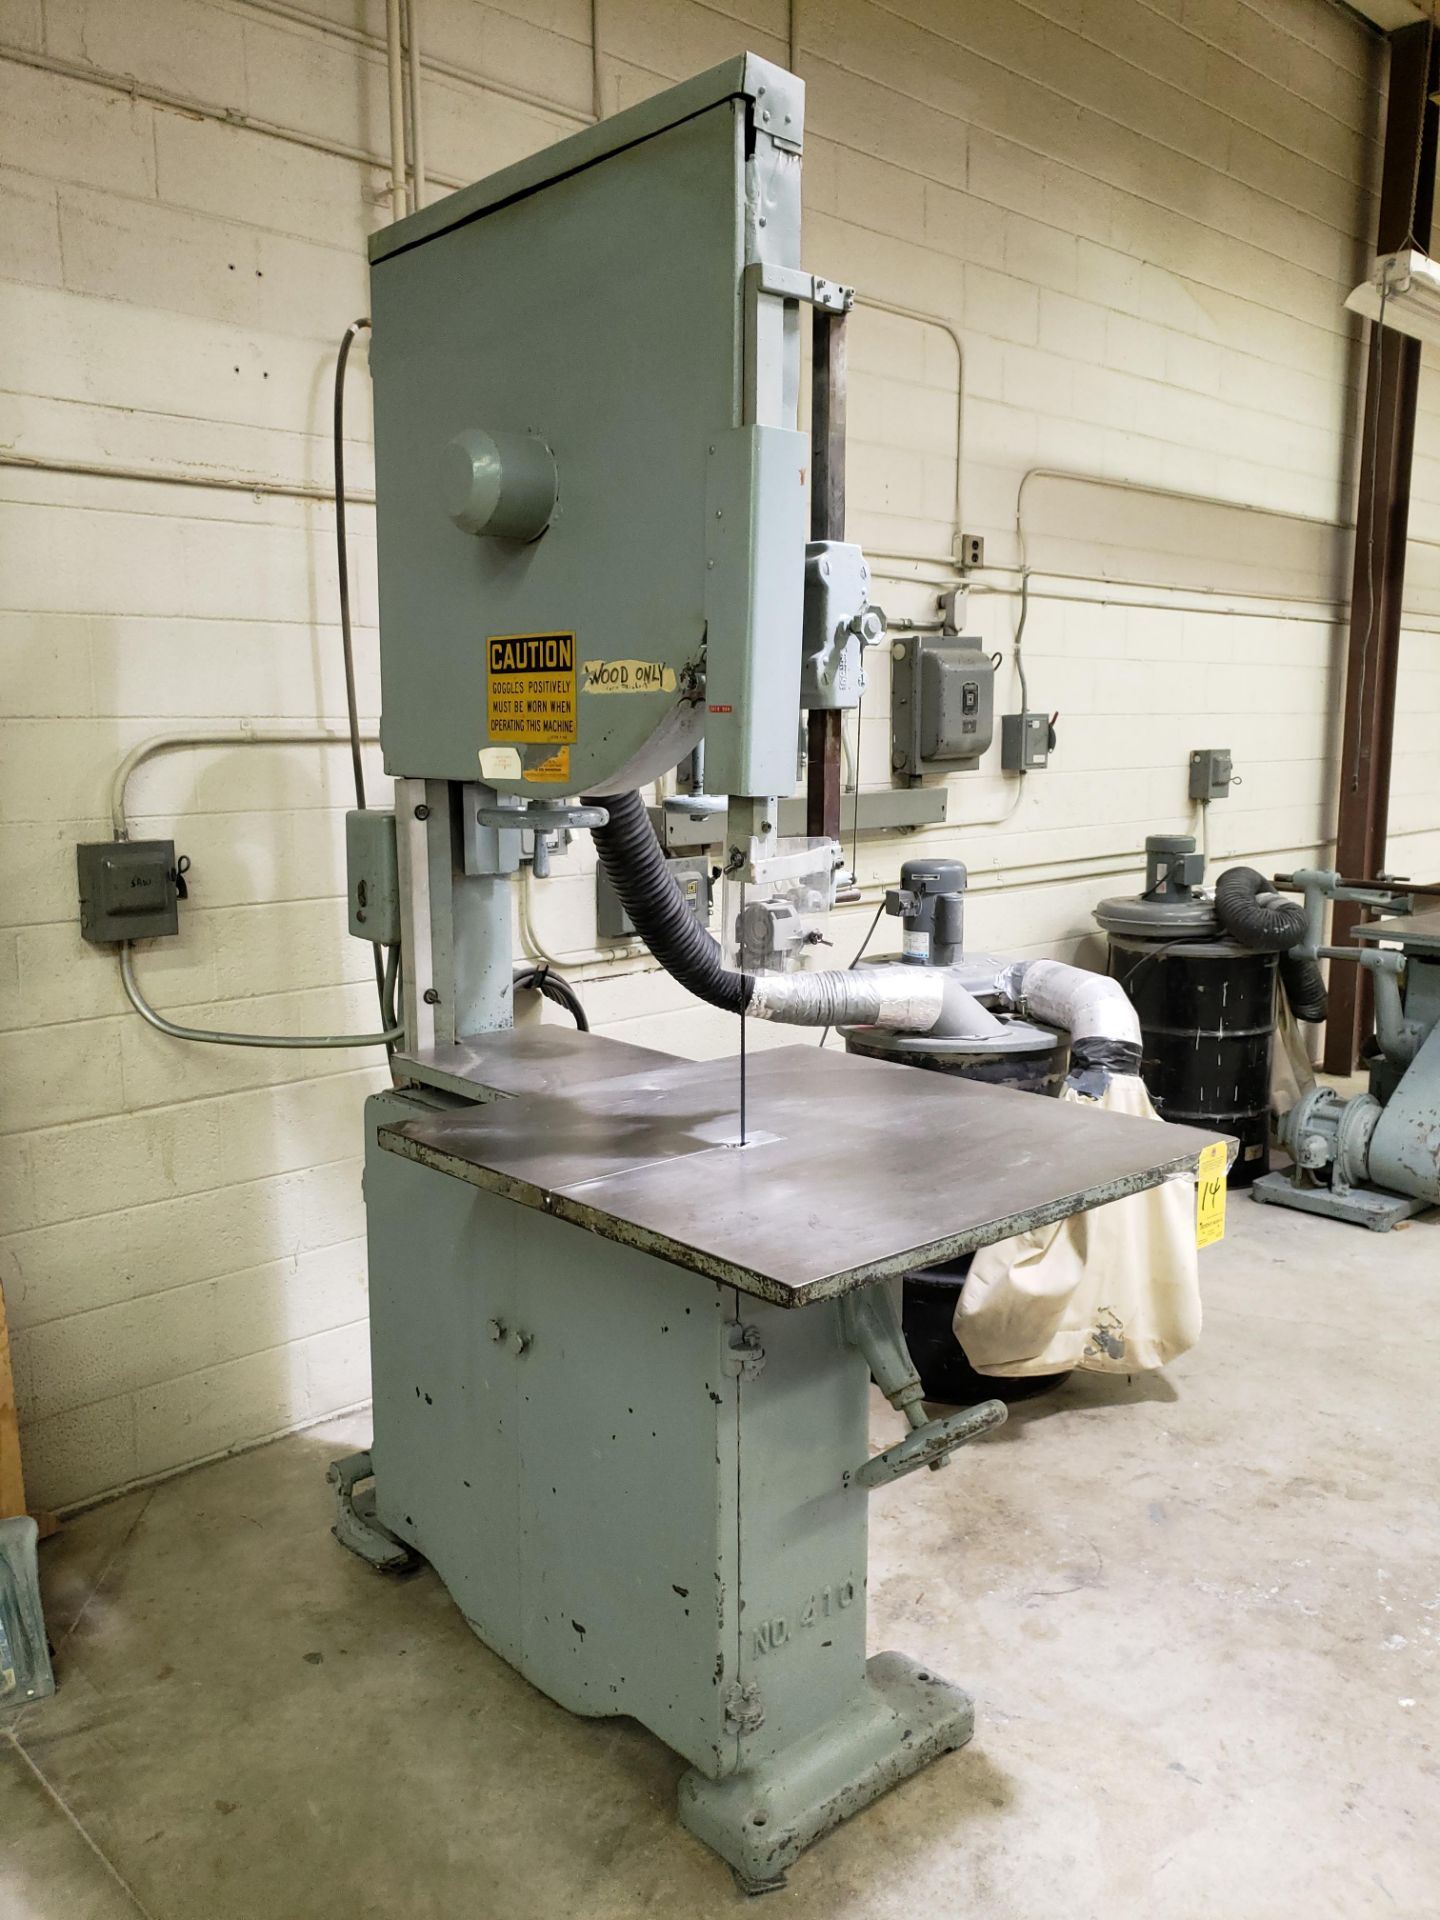 Greenlee No. 410 36" Vertical Bandsaw, 36" Square Table w/ 16" x 19" Extension, 220 v., 3 PH, w/ - Image 2 of 5